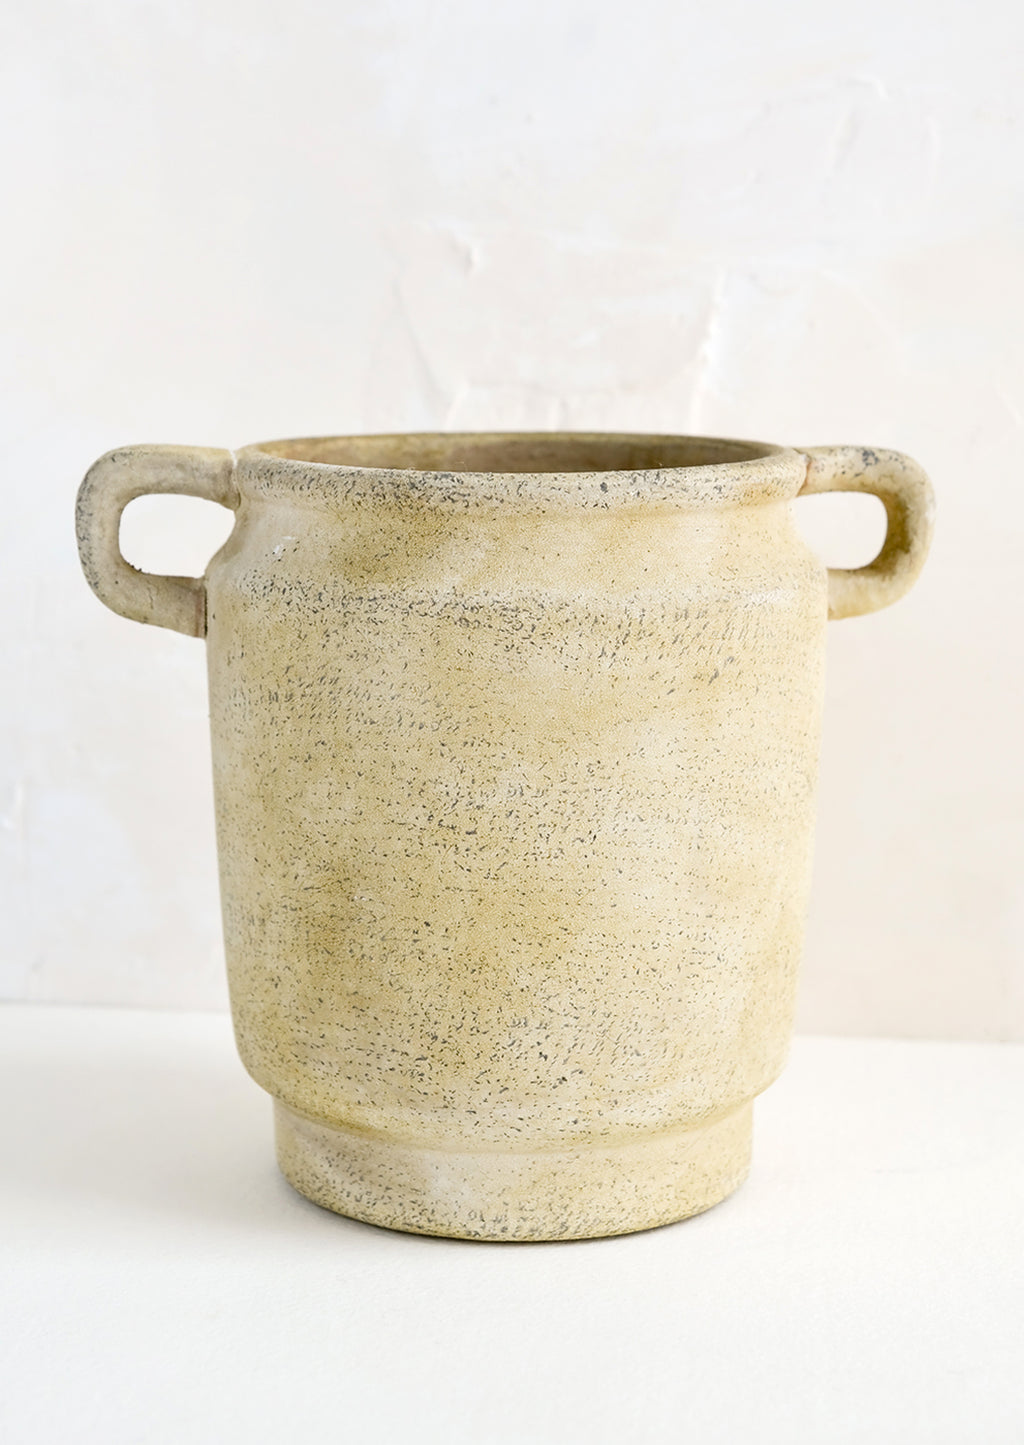 1: A distressed beige ceramic vase with handles at top sides.